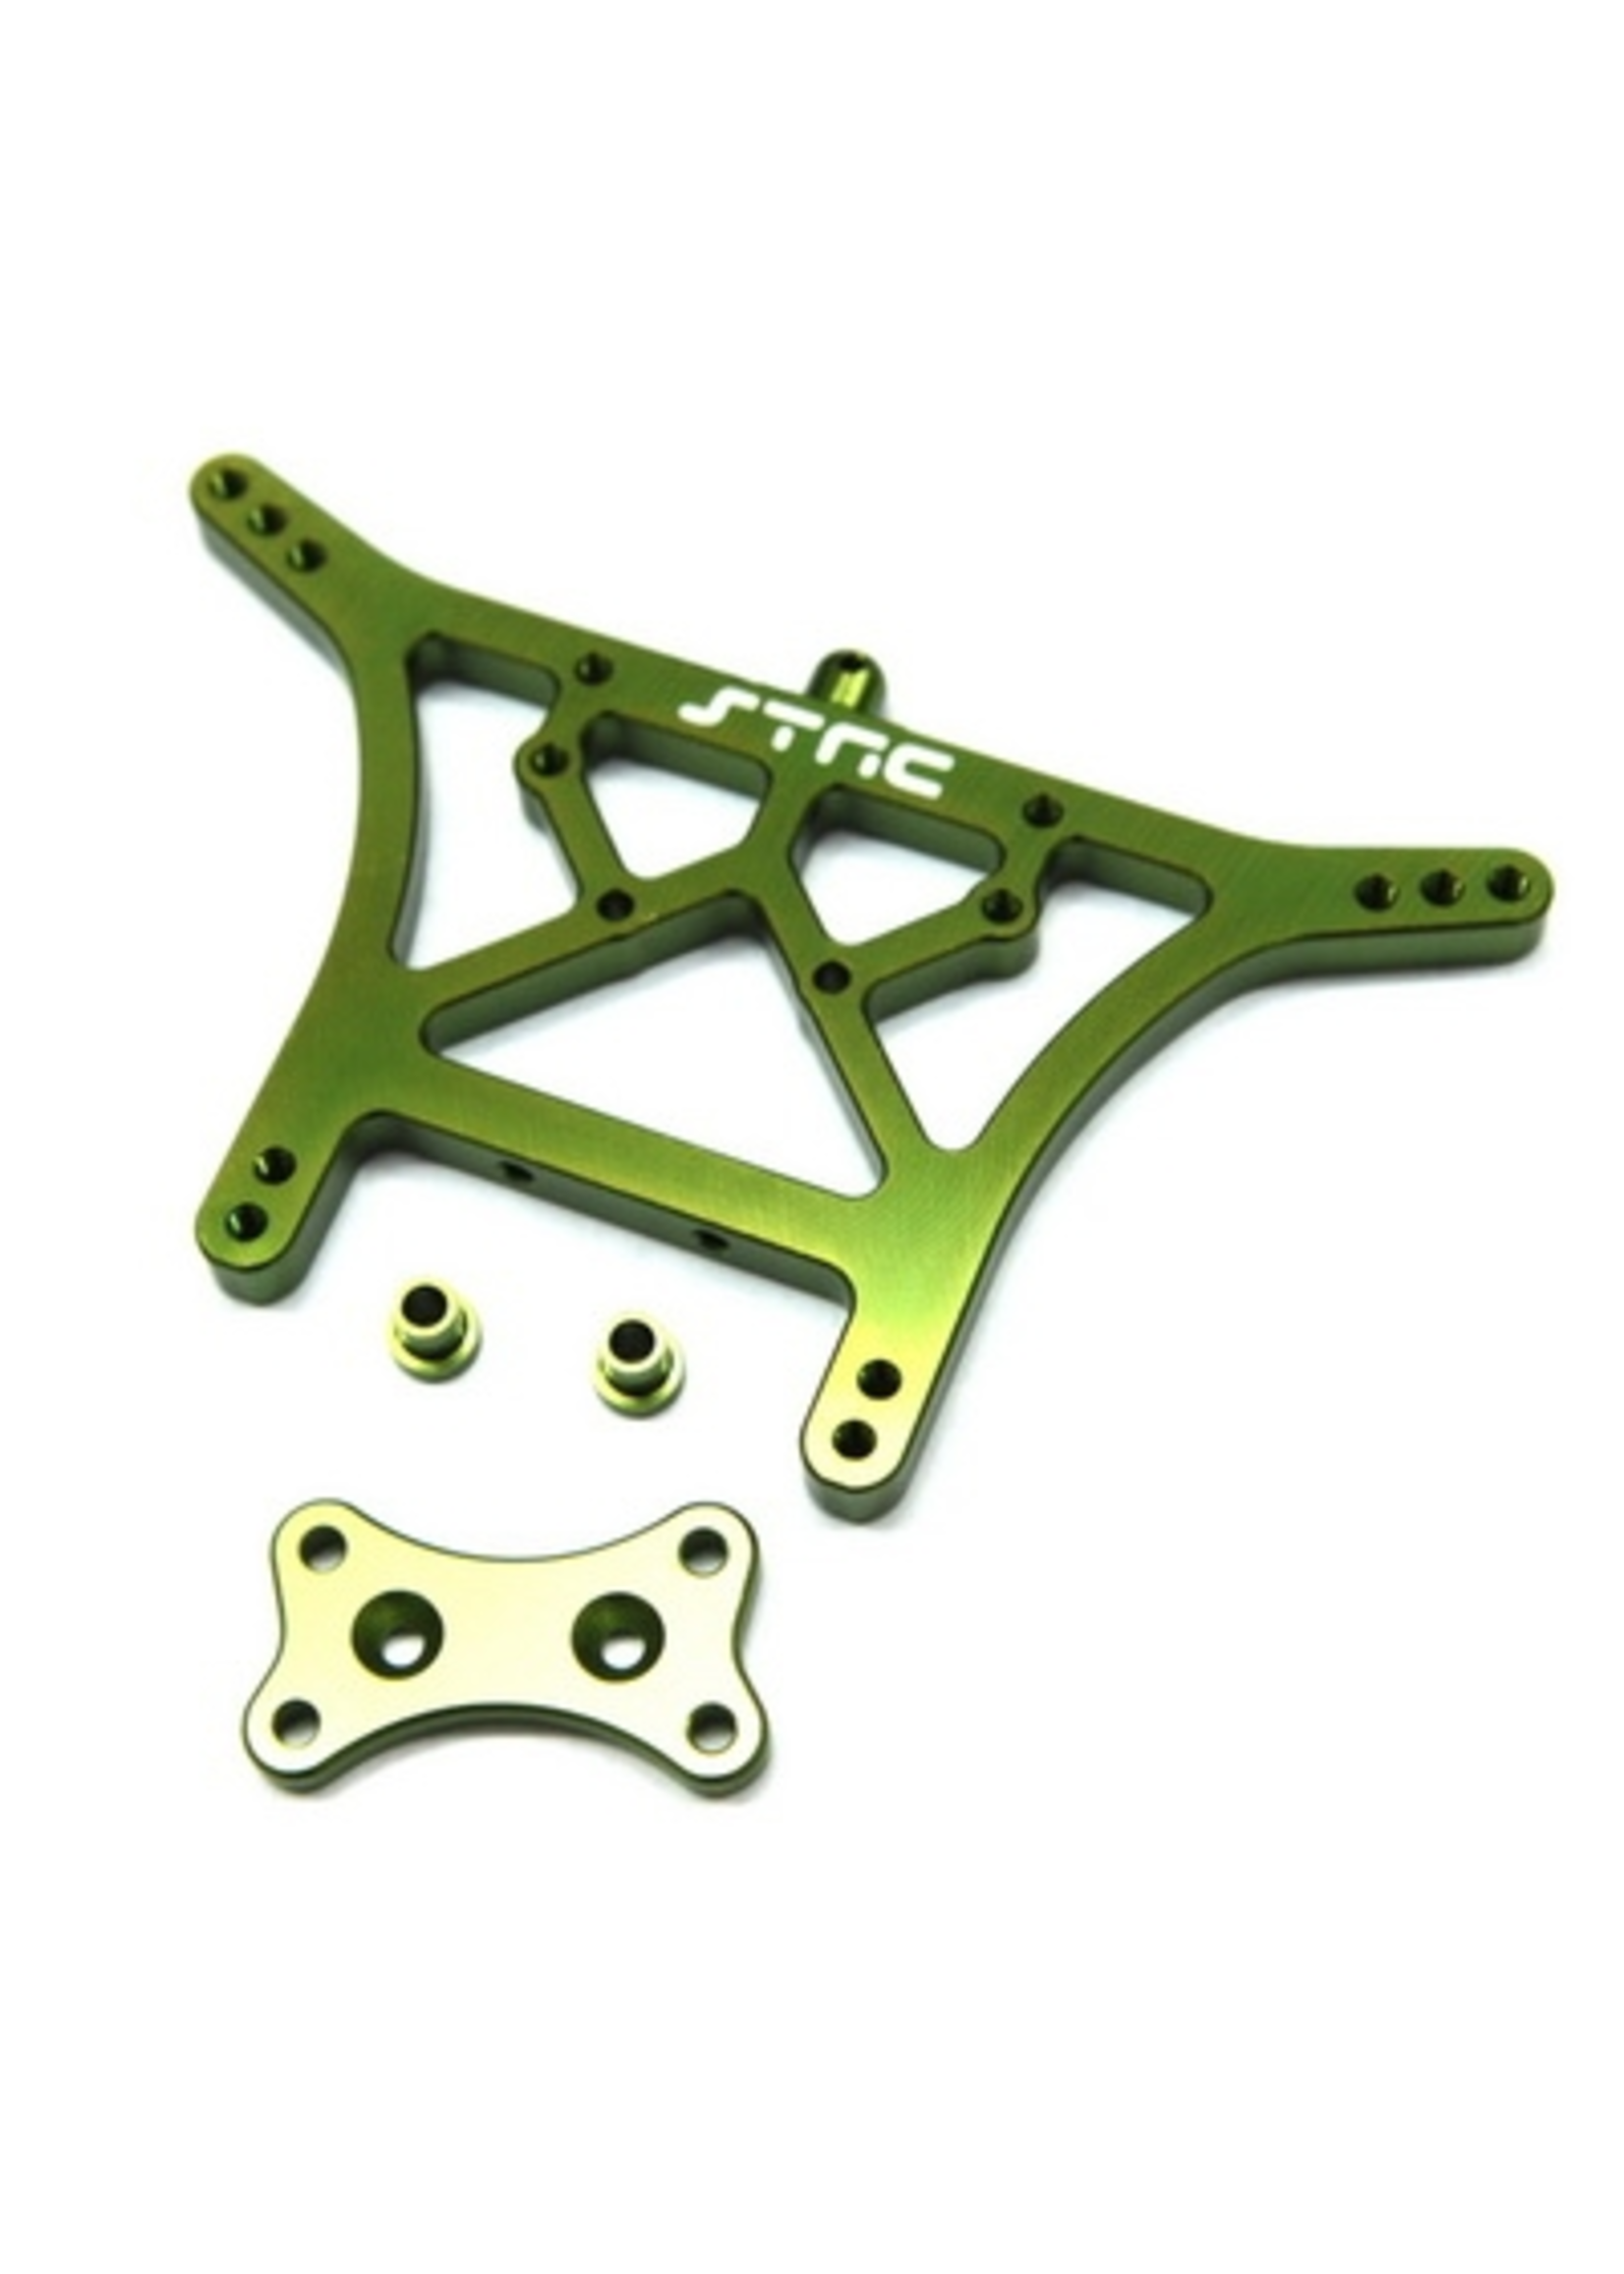 ST Racing Concepts SPTST3638G ST Racing Concepts Aluminum 6mm Heavy Duty Rear Shock Tower for Traxxas Stampede/Rustler/Bandit/Slash (Green)